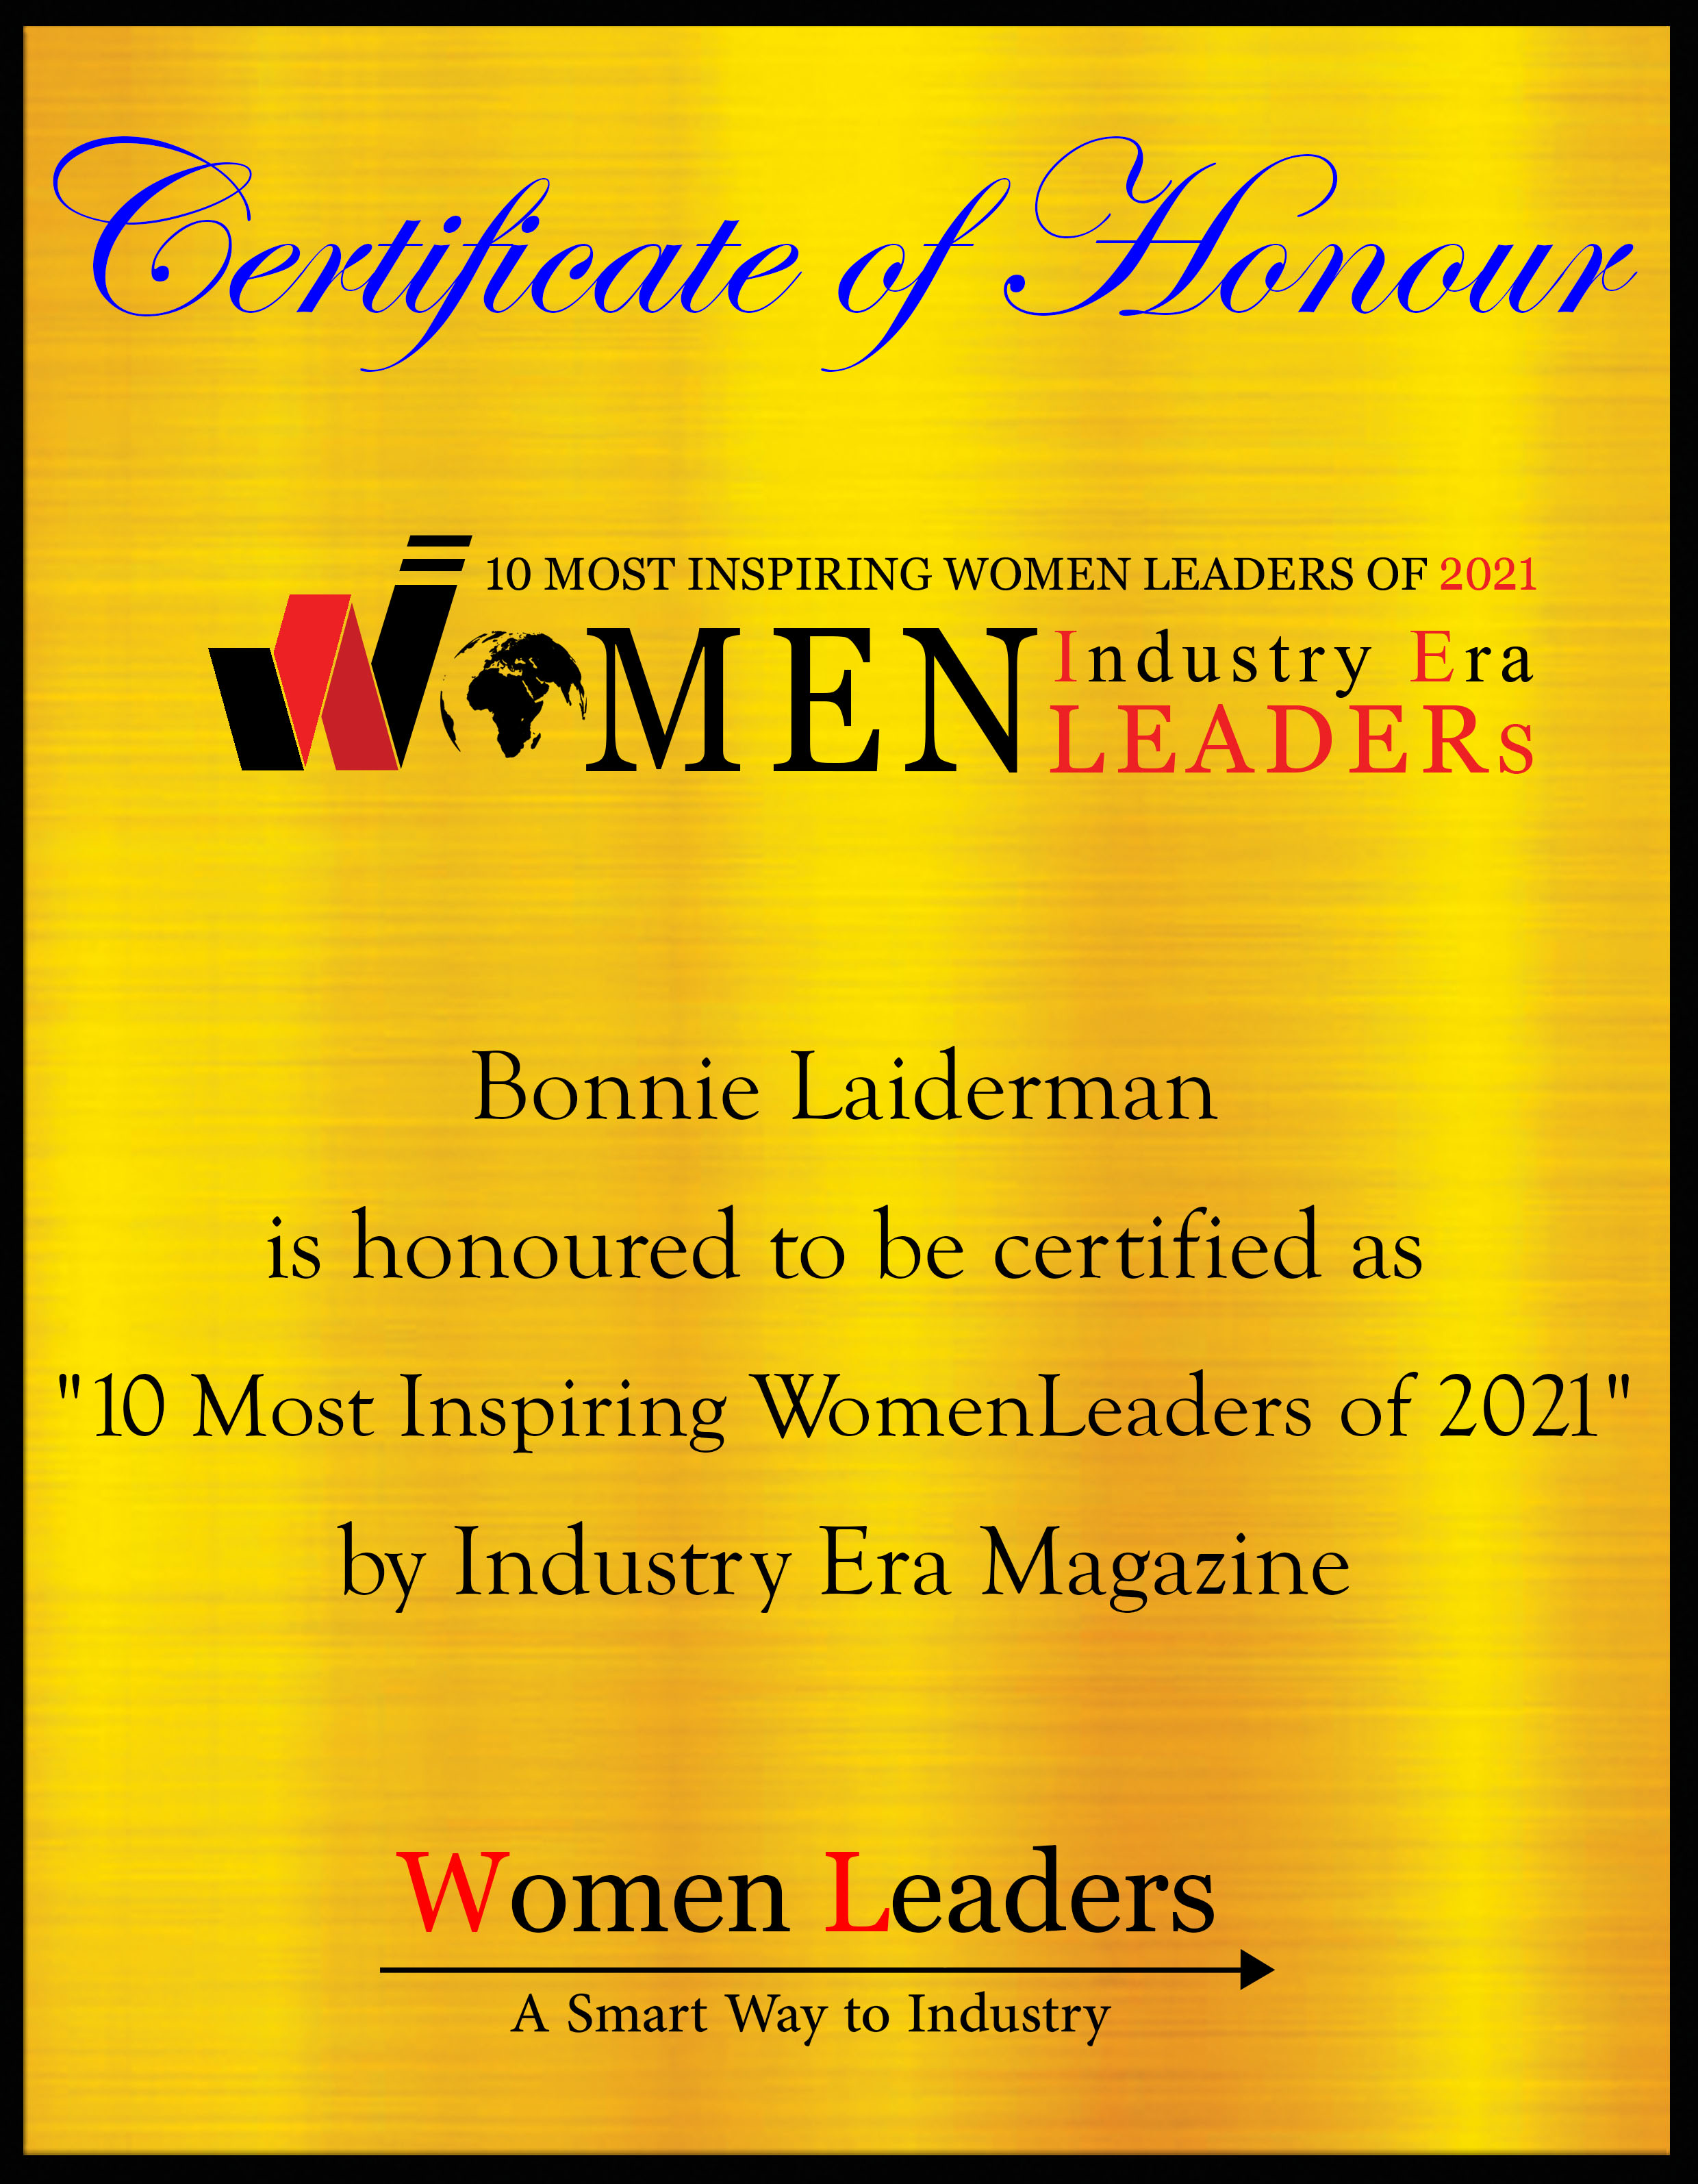 Bonnie Laiderman CEO of Veterans Home Care LLC, Most Inspiring WomenLeaders of 2021